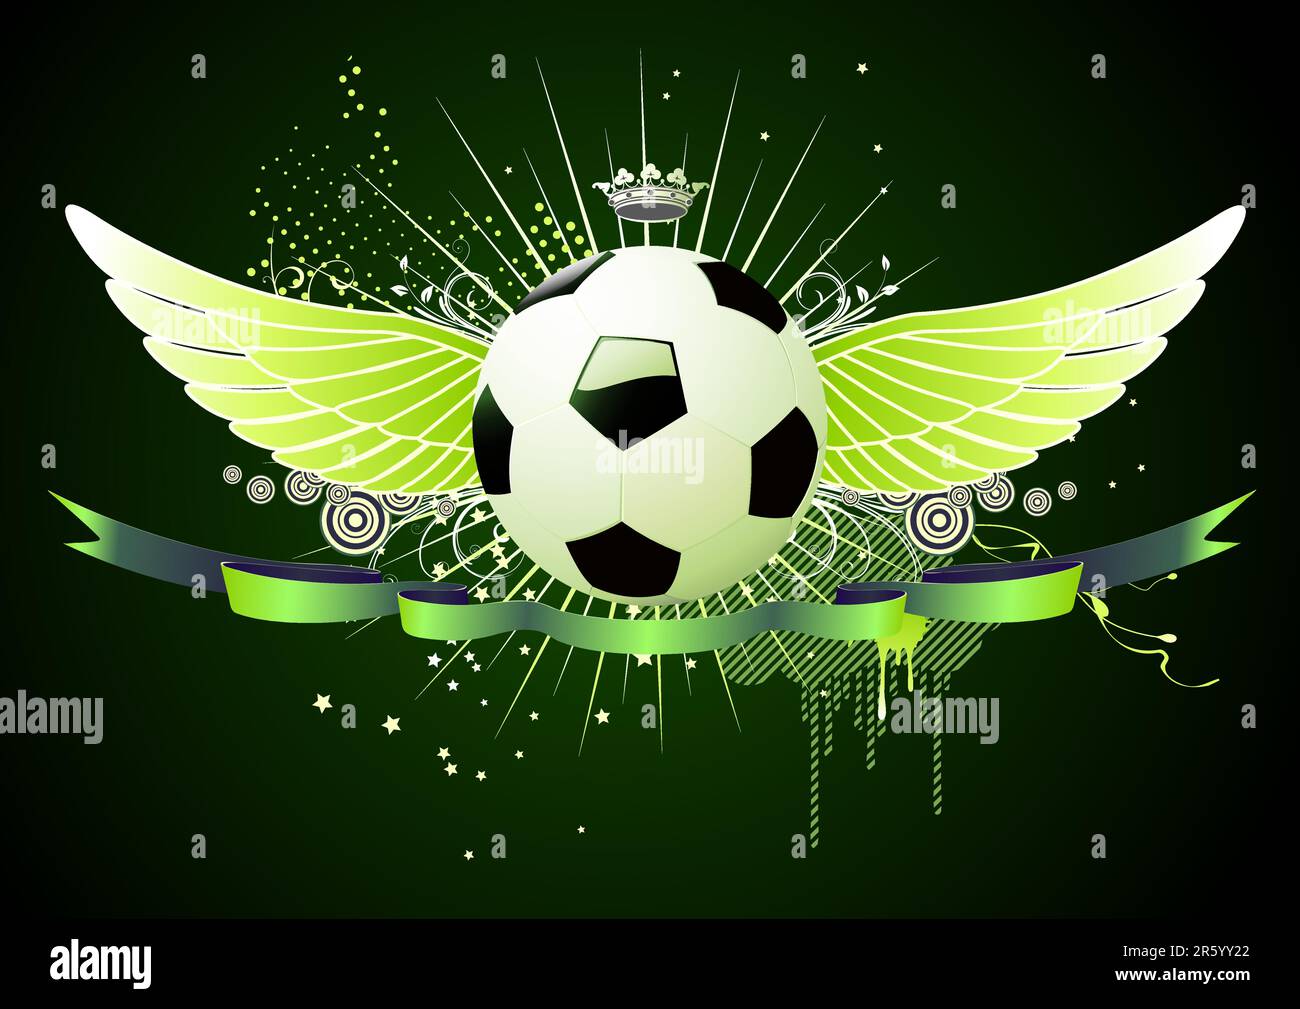 Vector illustration of style soccer football winged emblems Stock Vector